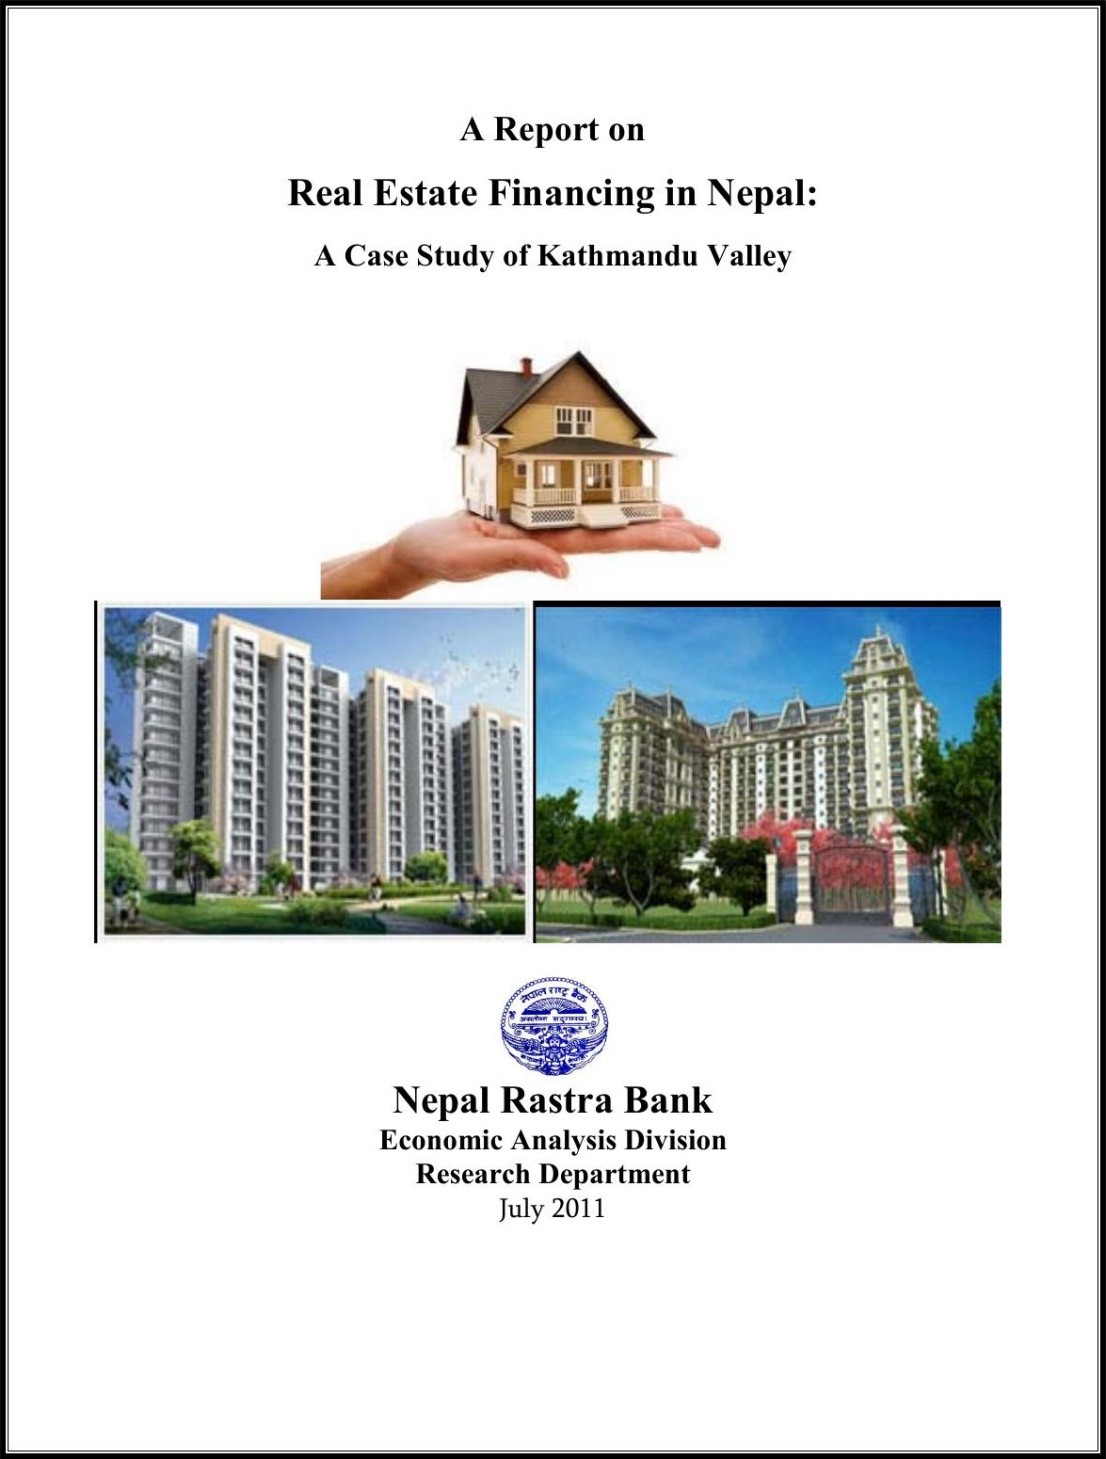 A Report on Real Estate Financing in Nepal